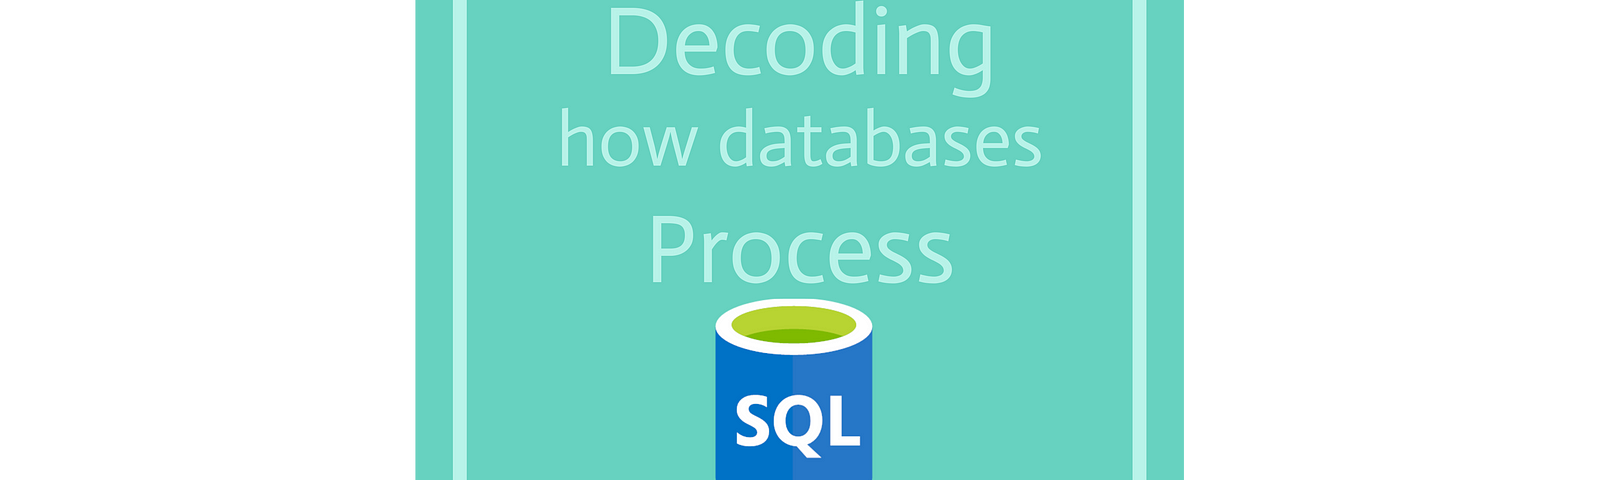 Self-made image. Decoding how databases process SQL queries.